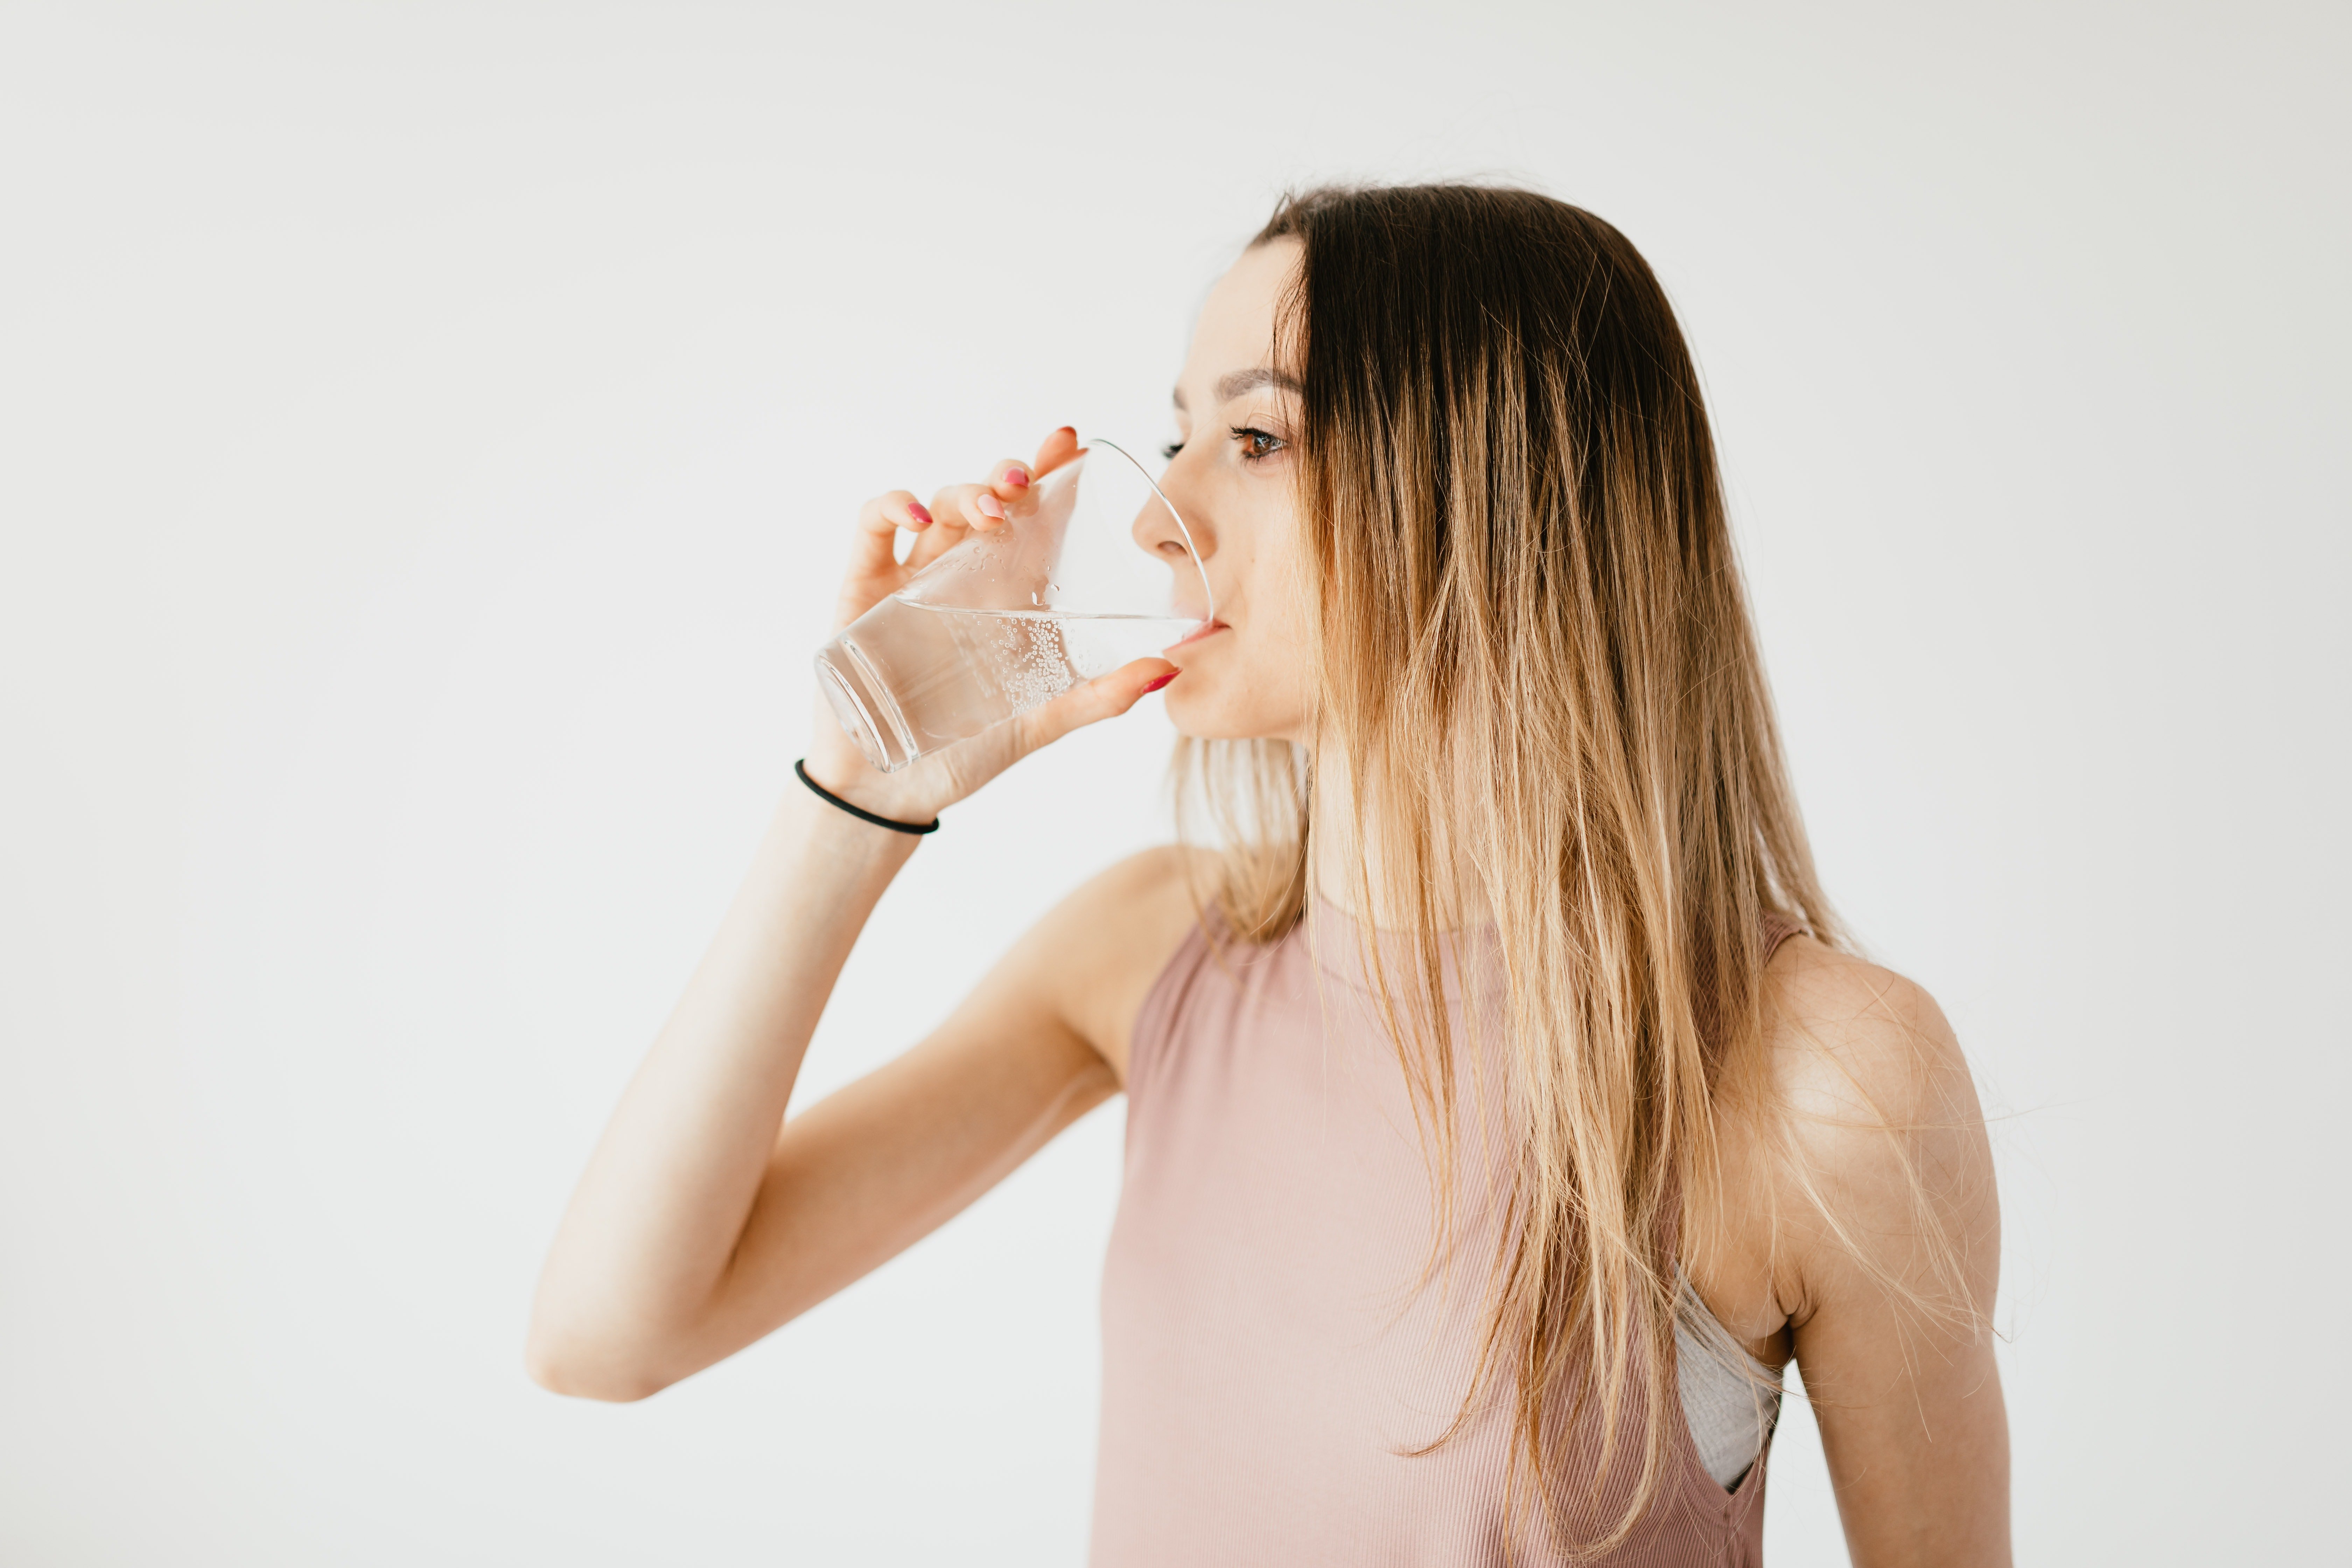 A woman drinking a glass of water | Source: Pexels